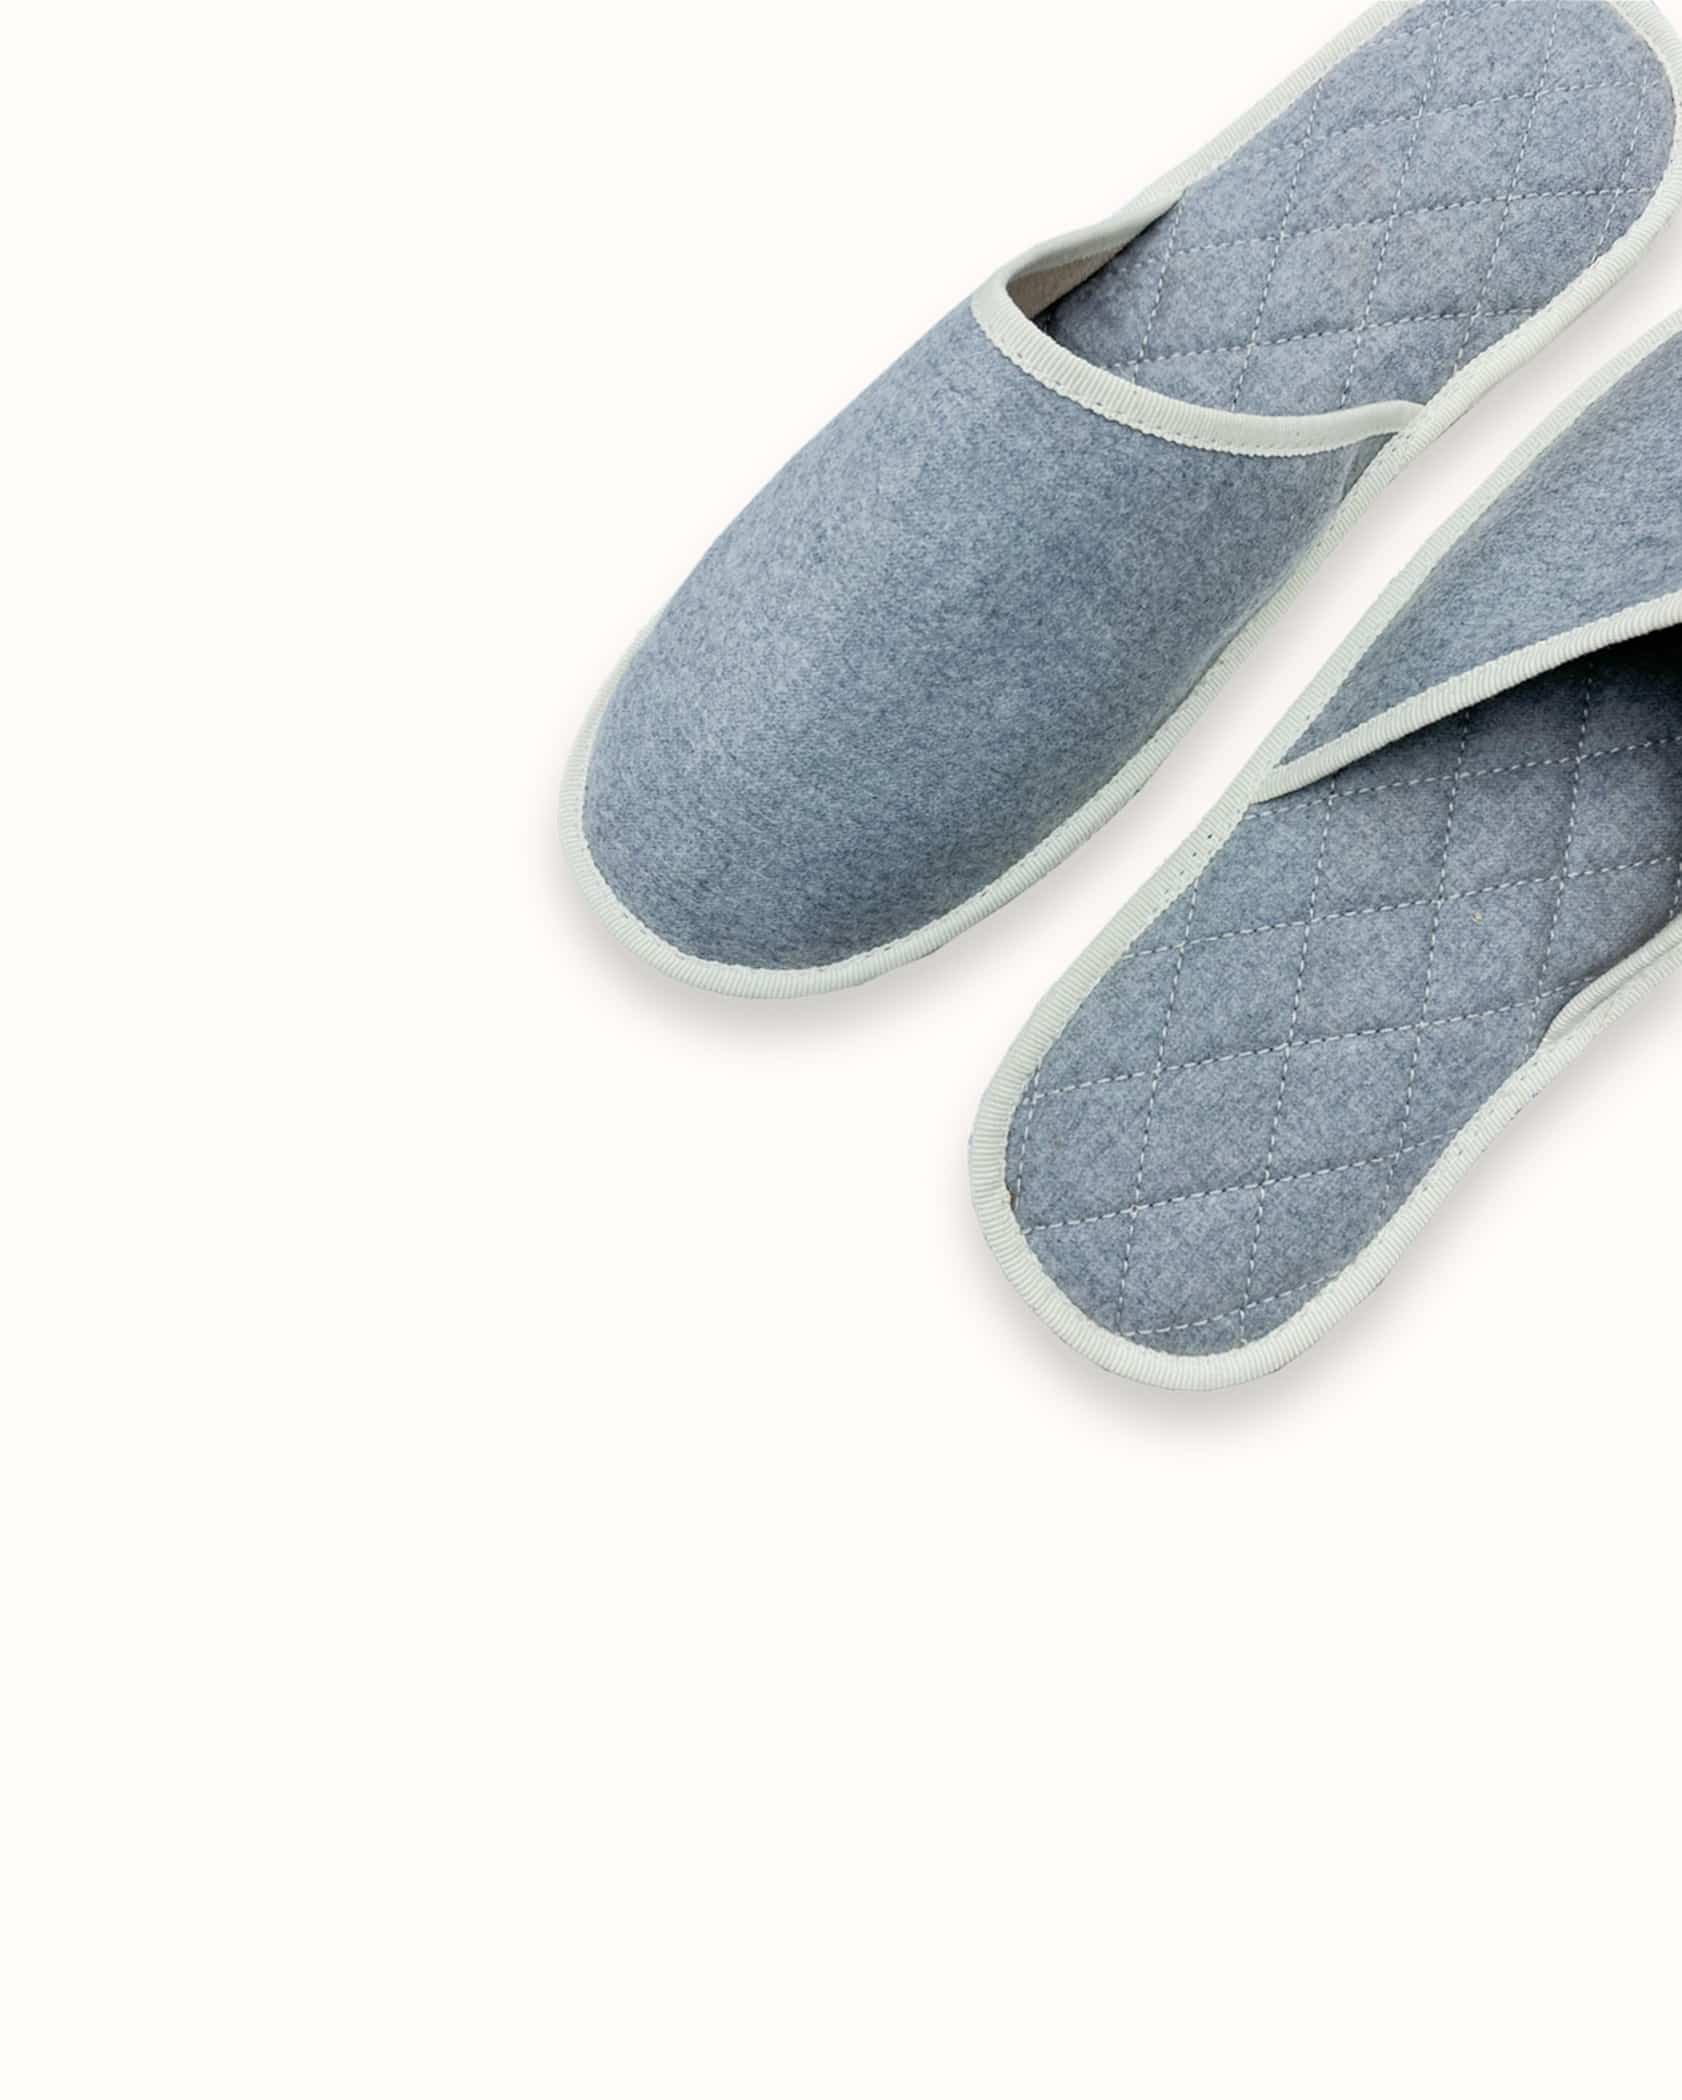 French slippers for men, women and kids. Le Spleen "Comme un Ouragan", blue and white. A slip-on like hotel slippers with a quilted padding and an outstanding craftsmanship manufacturing. Made in France.